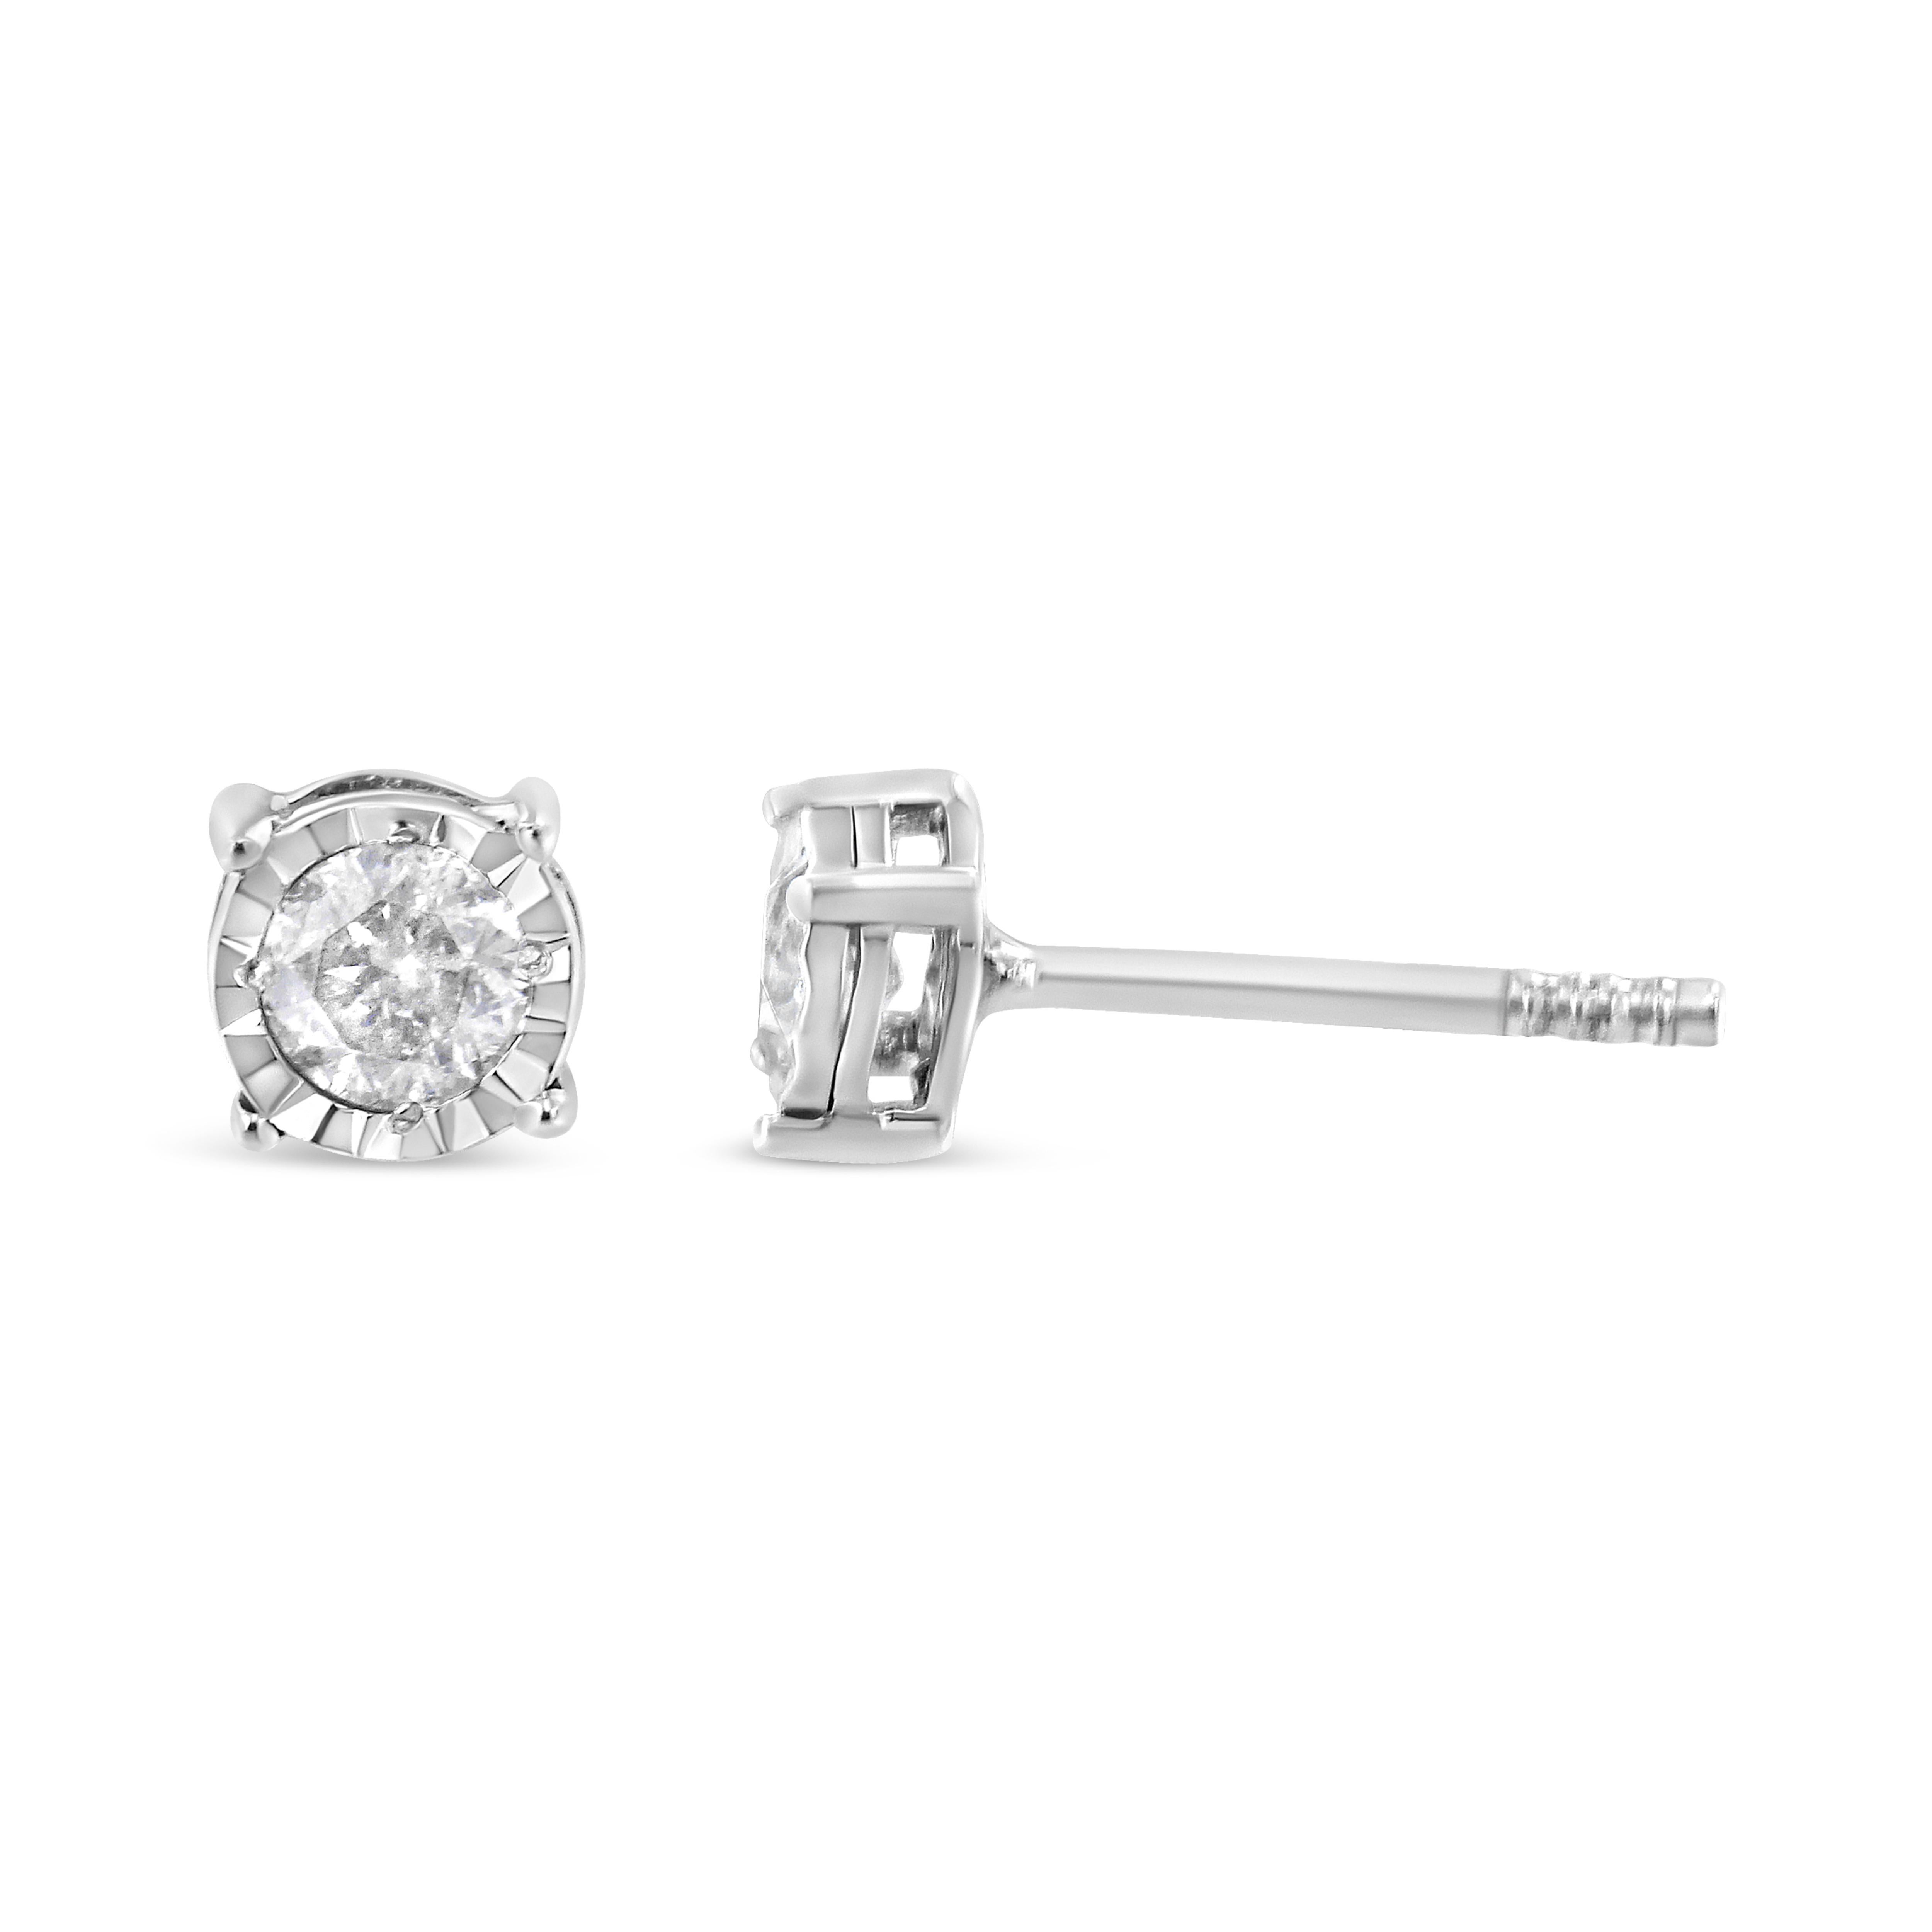 Contemporary .925 Sterling Silver 3/8 Carat Brilliant Cut Diamond Solitaire Stud Earrings For Sale